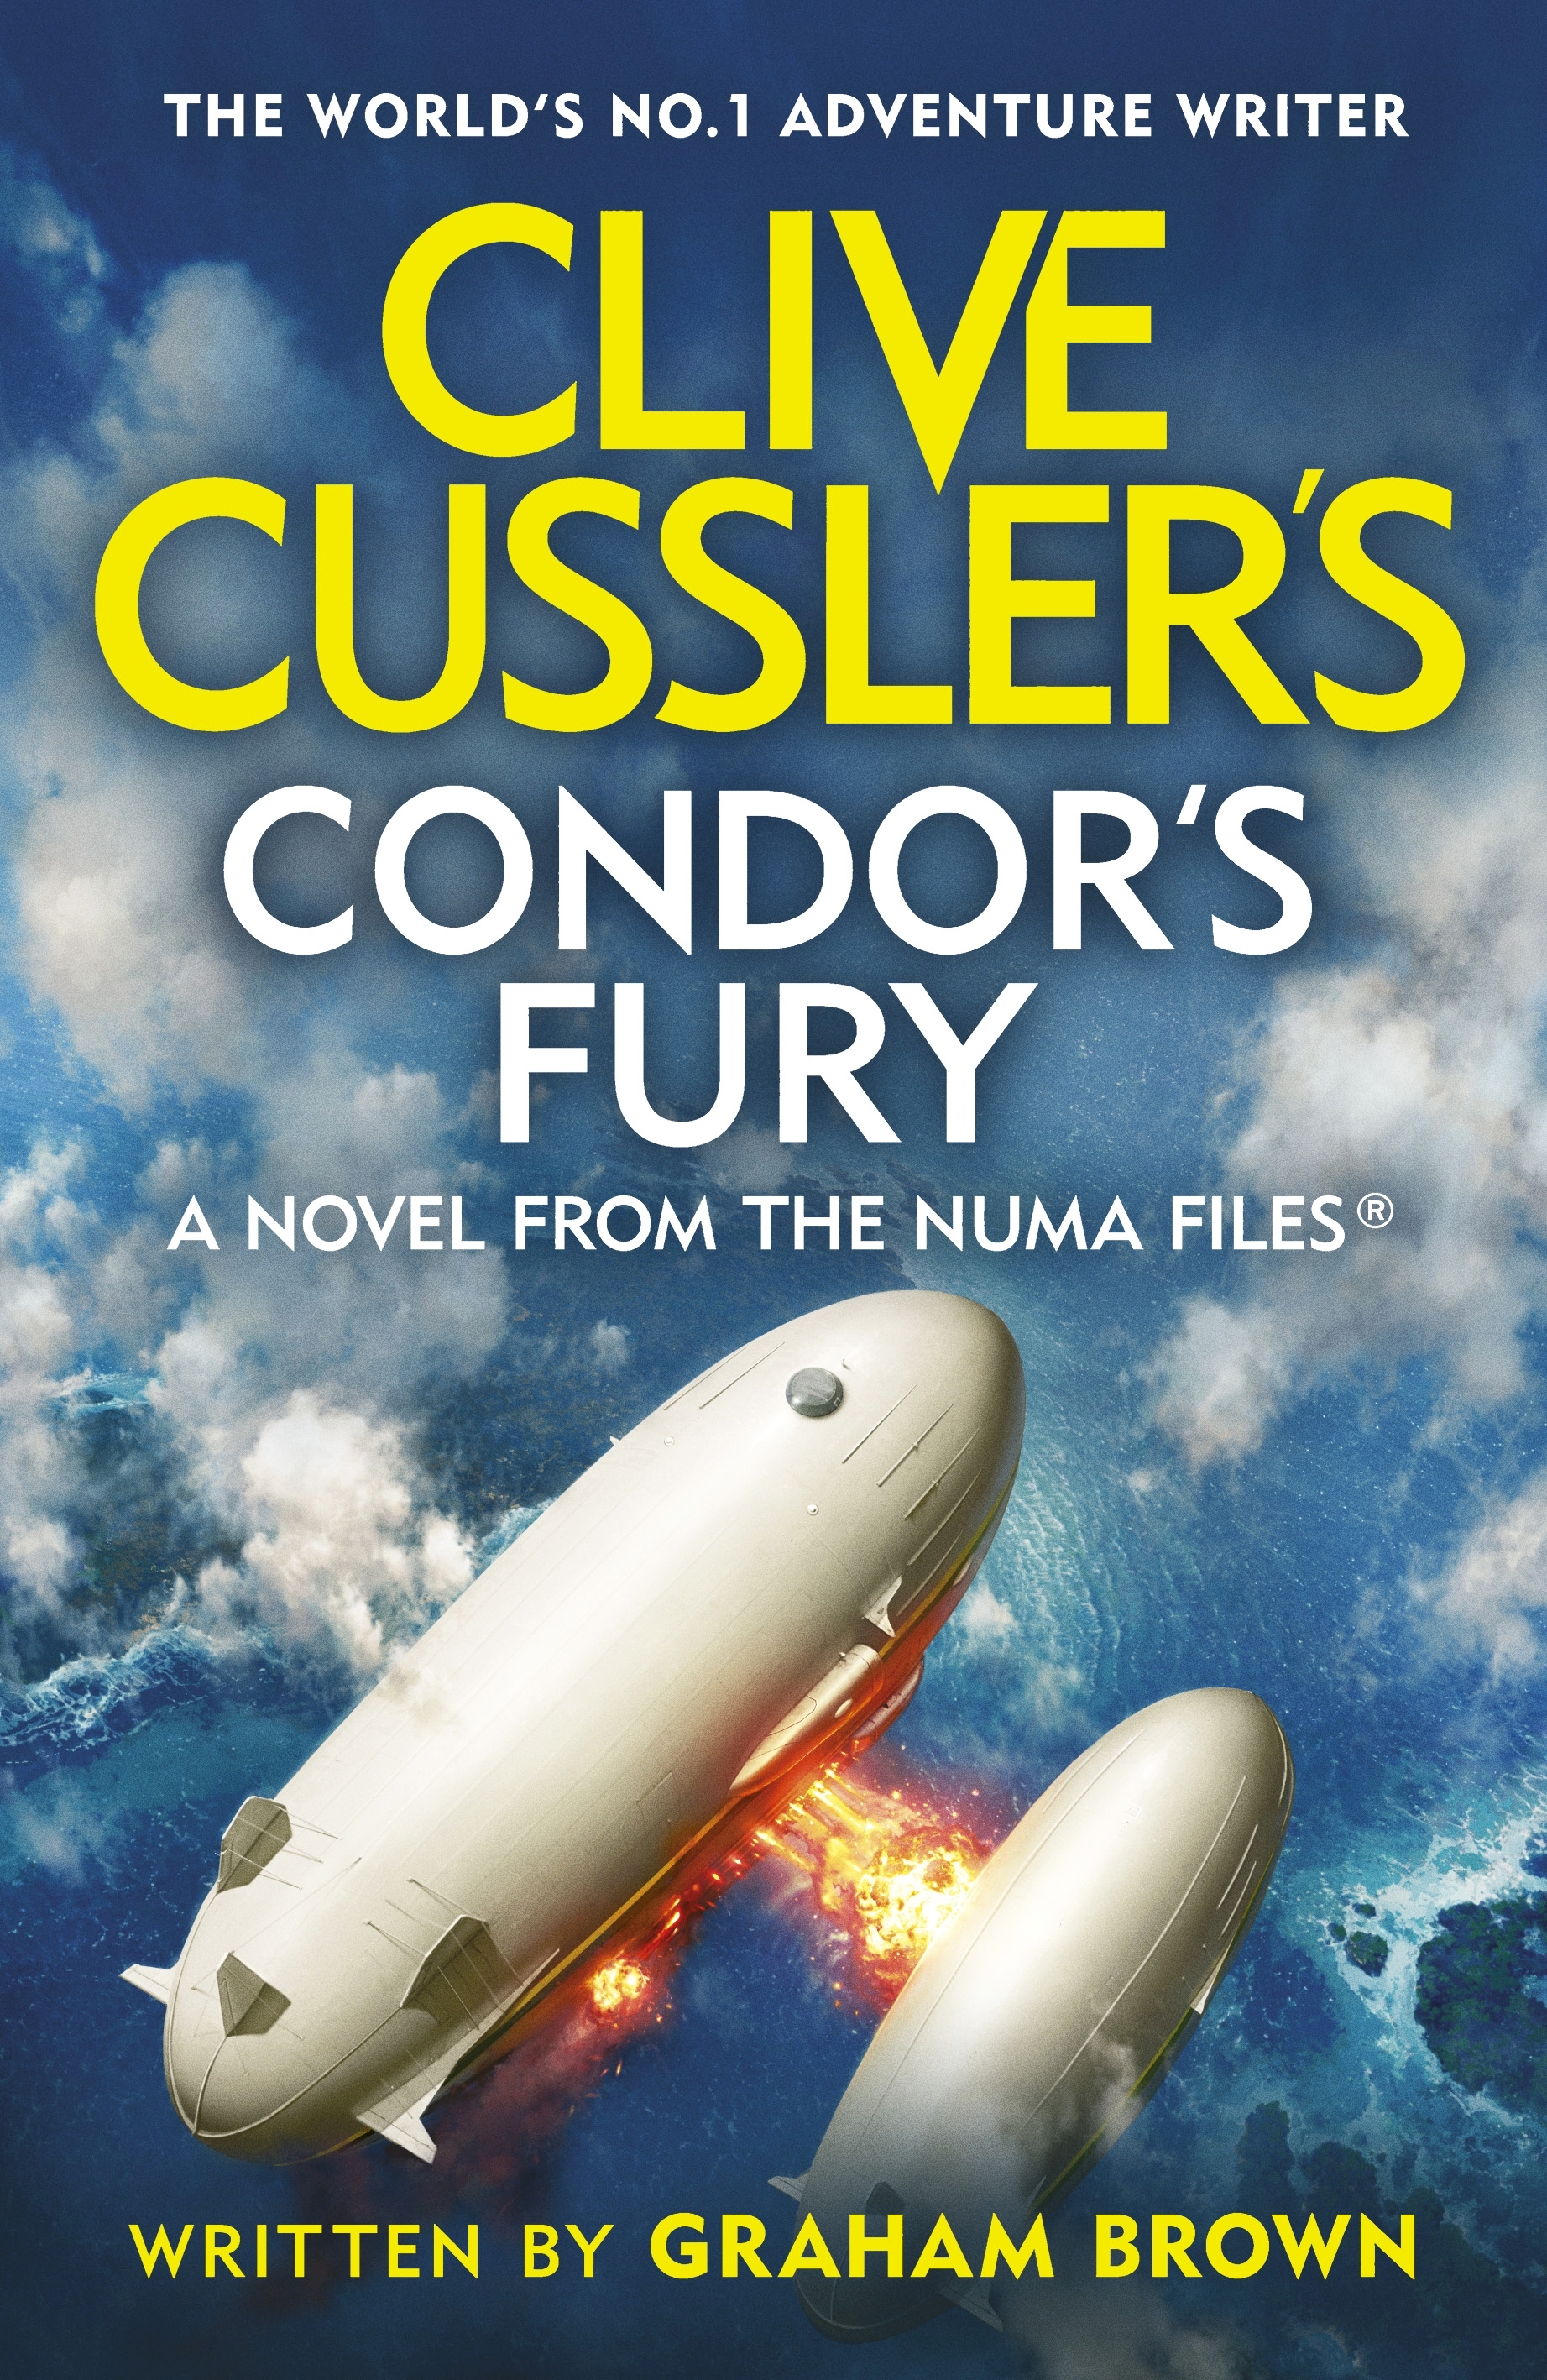 Clive Cussler's Condor's Fury by Graham Brown - Penguin Books New 